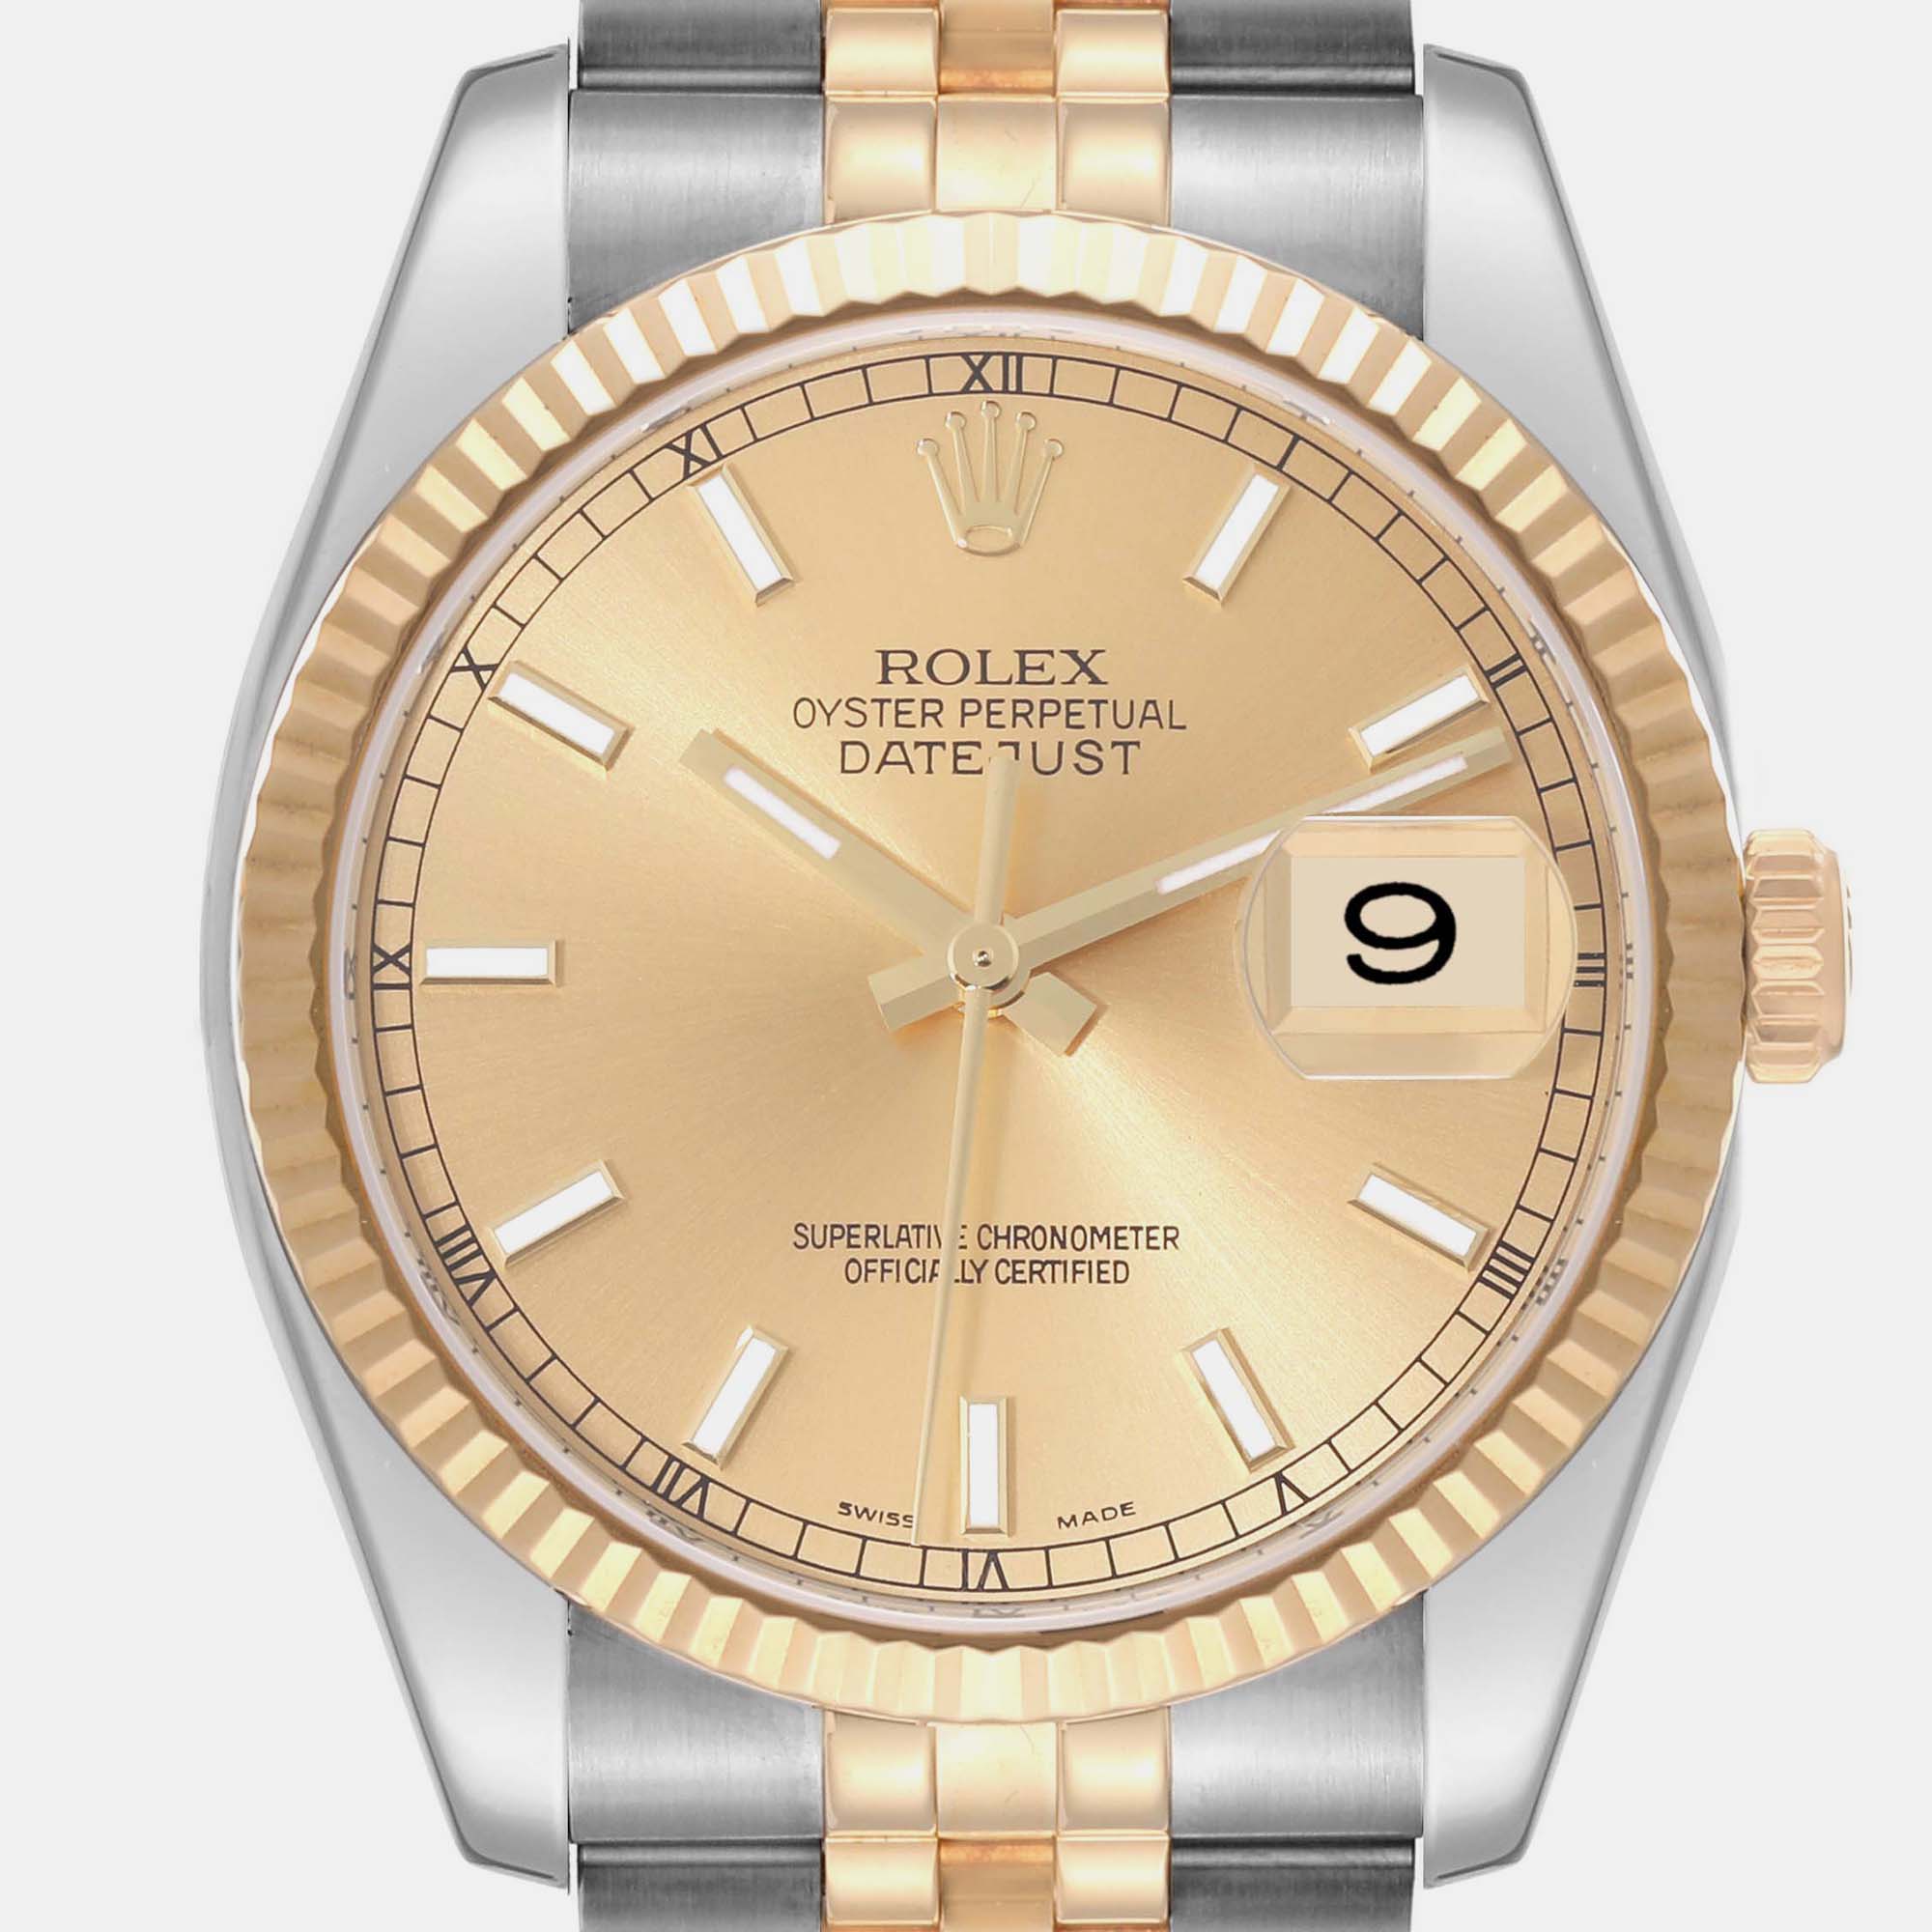 Rolex Datejust Steel Yellow Gold Champagne Dial Mens Watch 116233 36 Mm